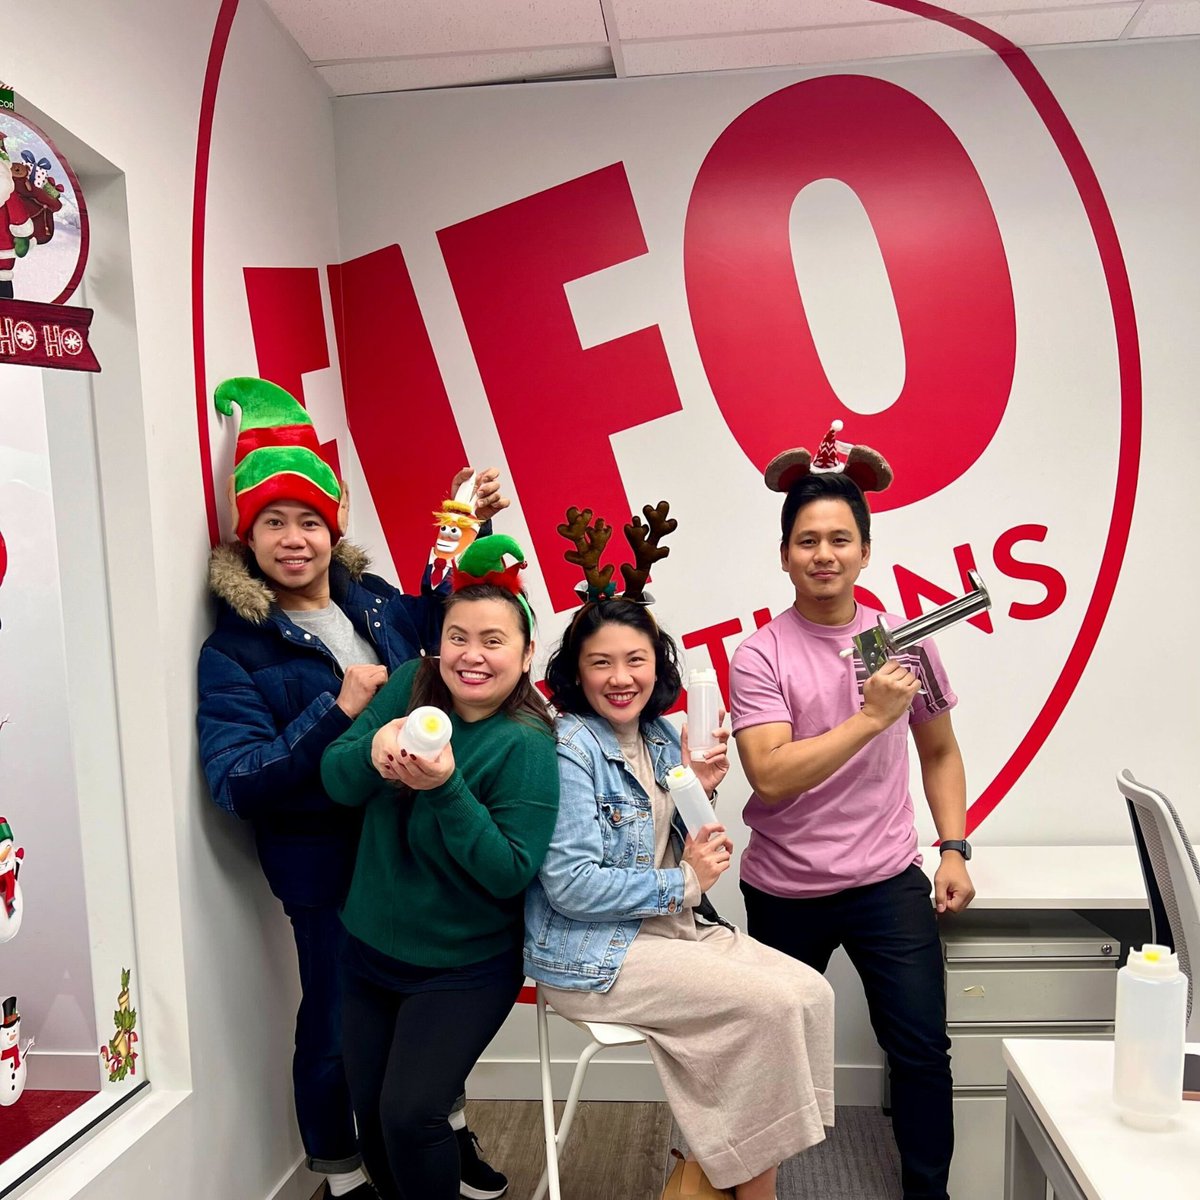 Throwing it back to last year, pre-Christmas! Even in January, we're feeling the snowy vibes and reliving that holiday cheer!

#ThrowbackThursday #Holiday2023 #ChristmasVibes #FIFOInnovations